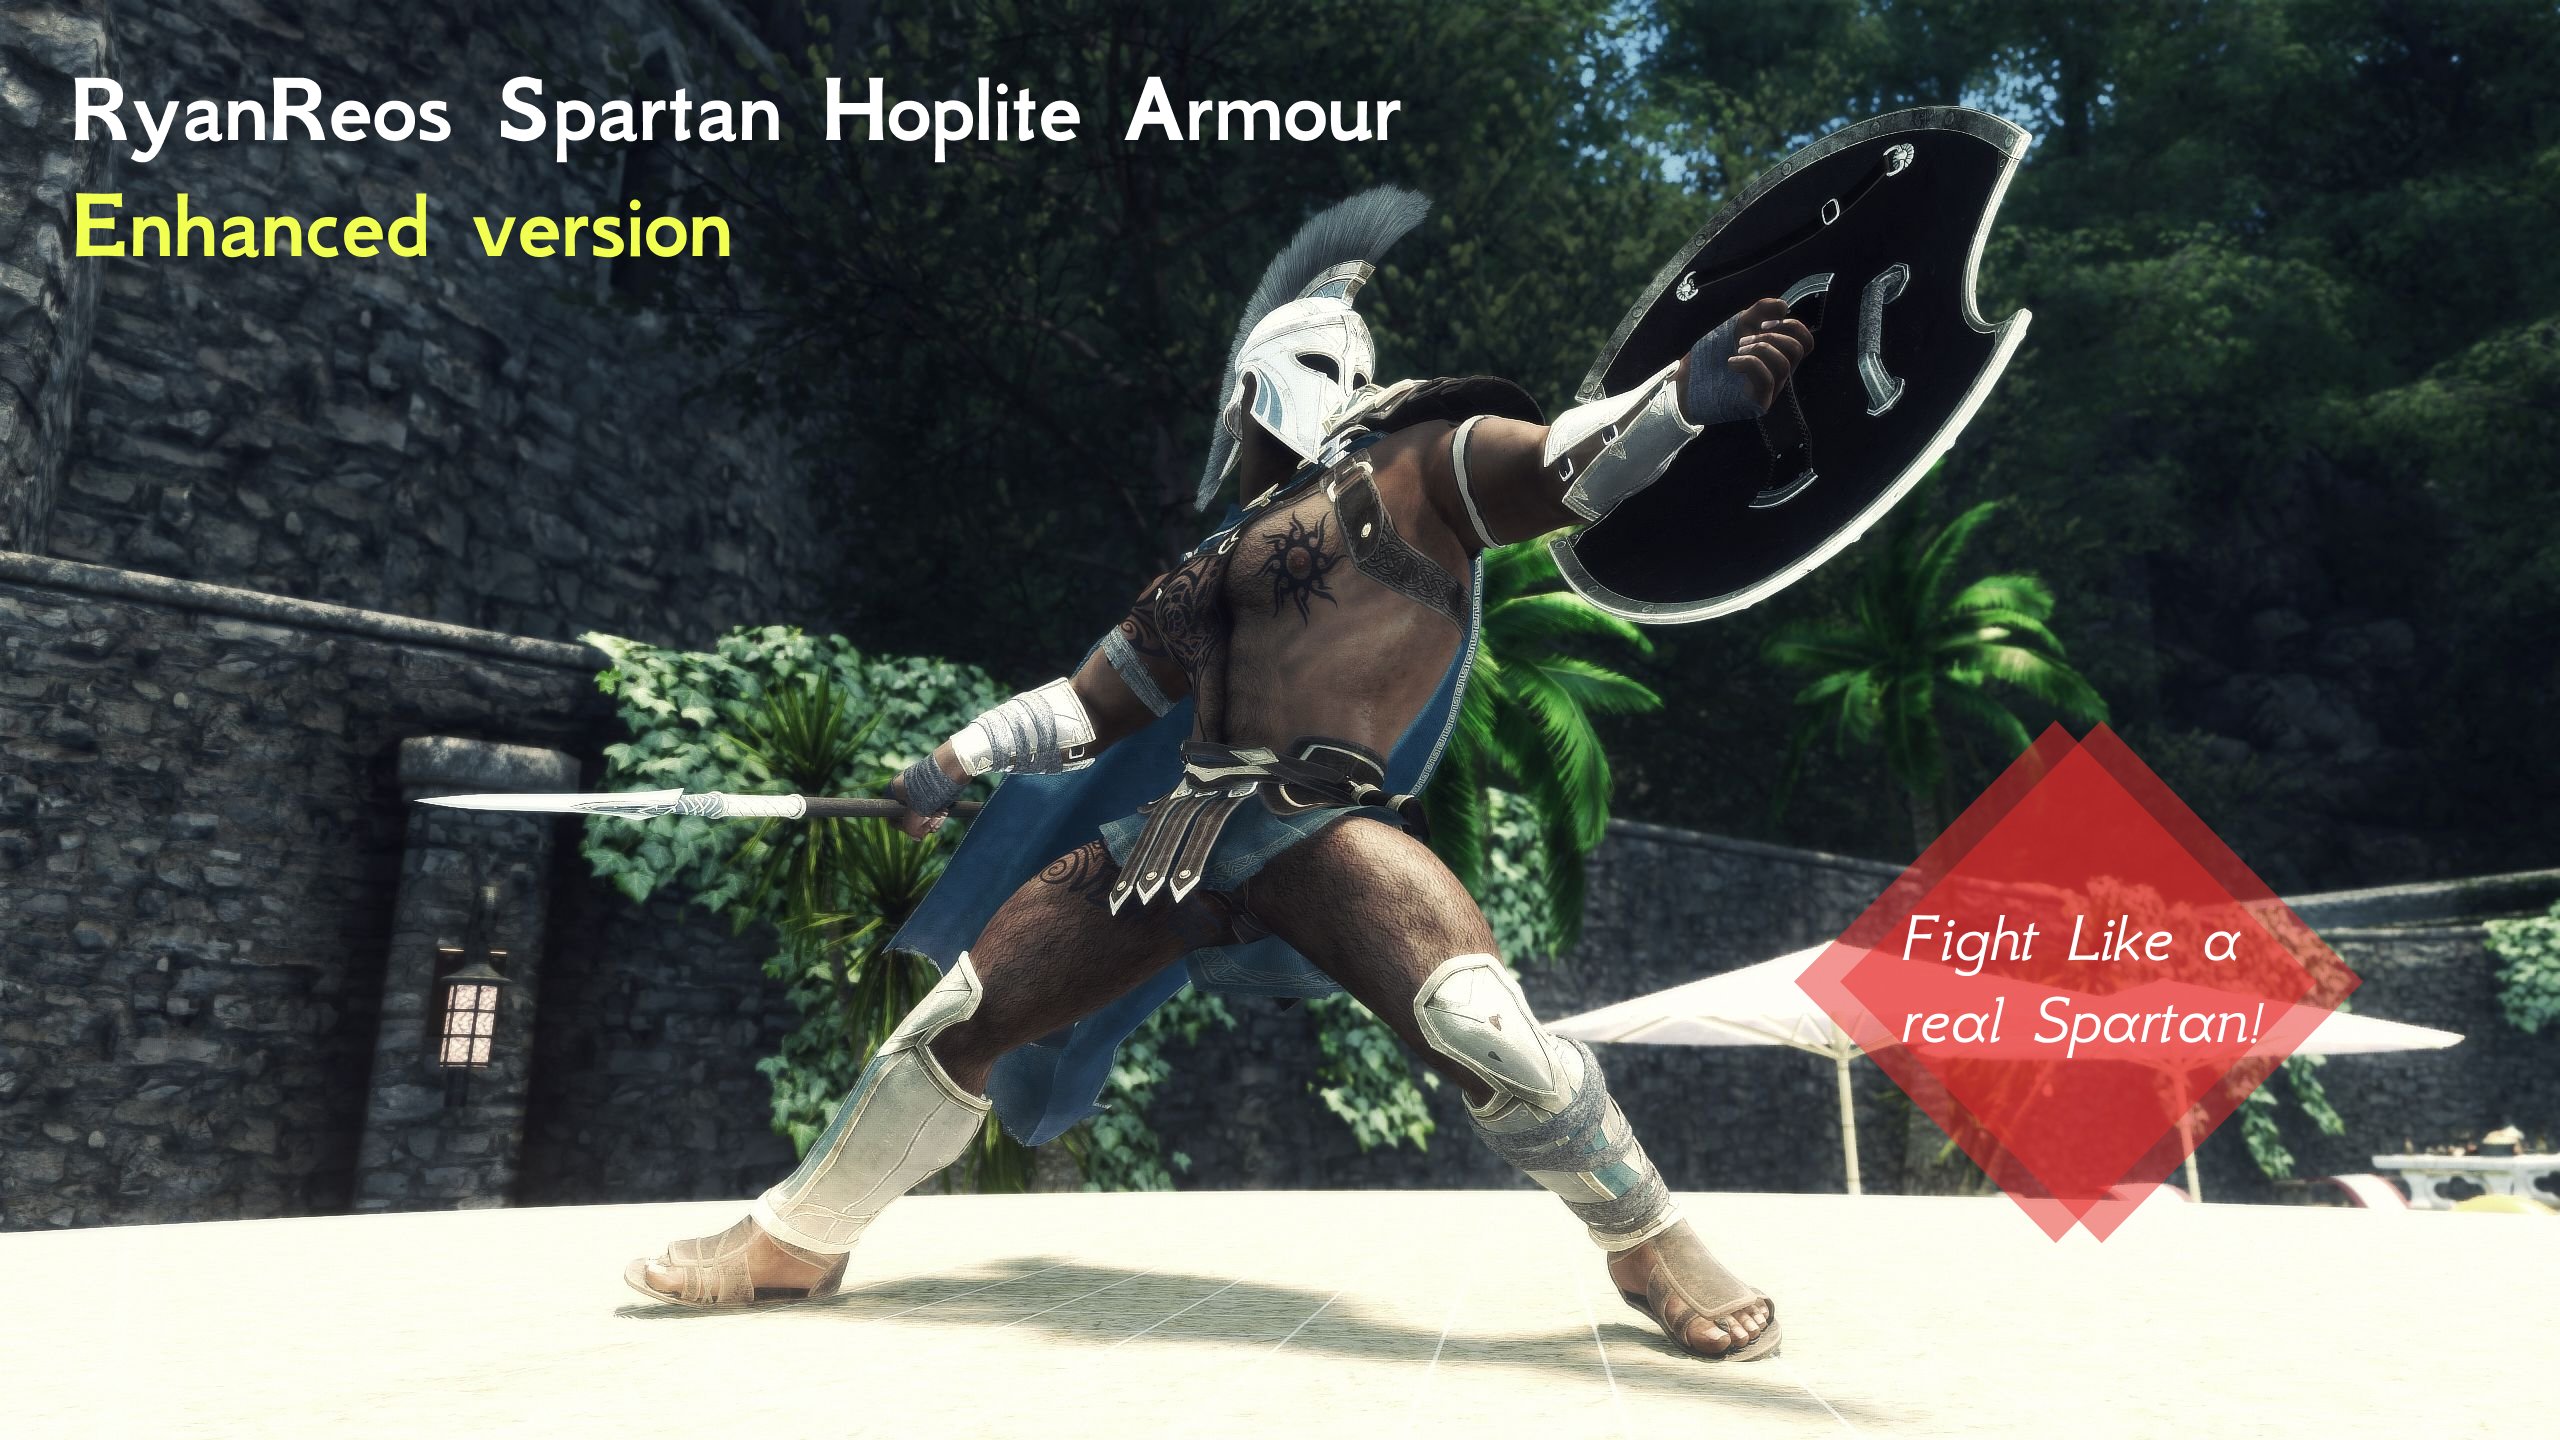 RyanReos Spartan Hoplite Outfit for SAM light with HDT-SMP: Enhanced Edition